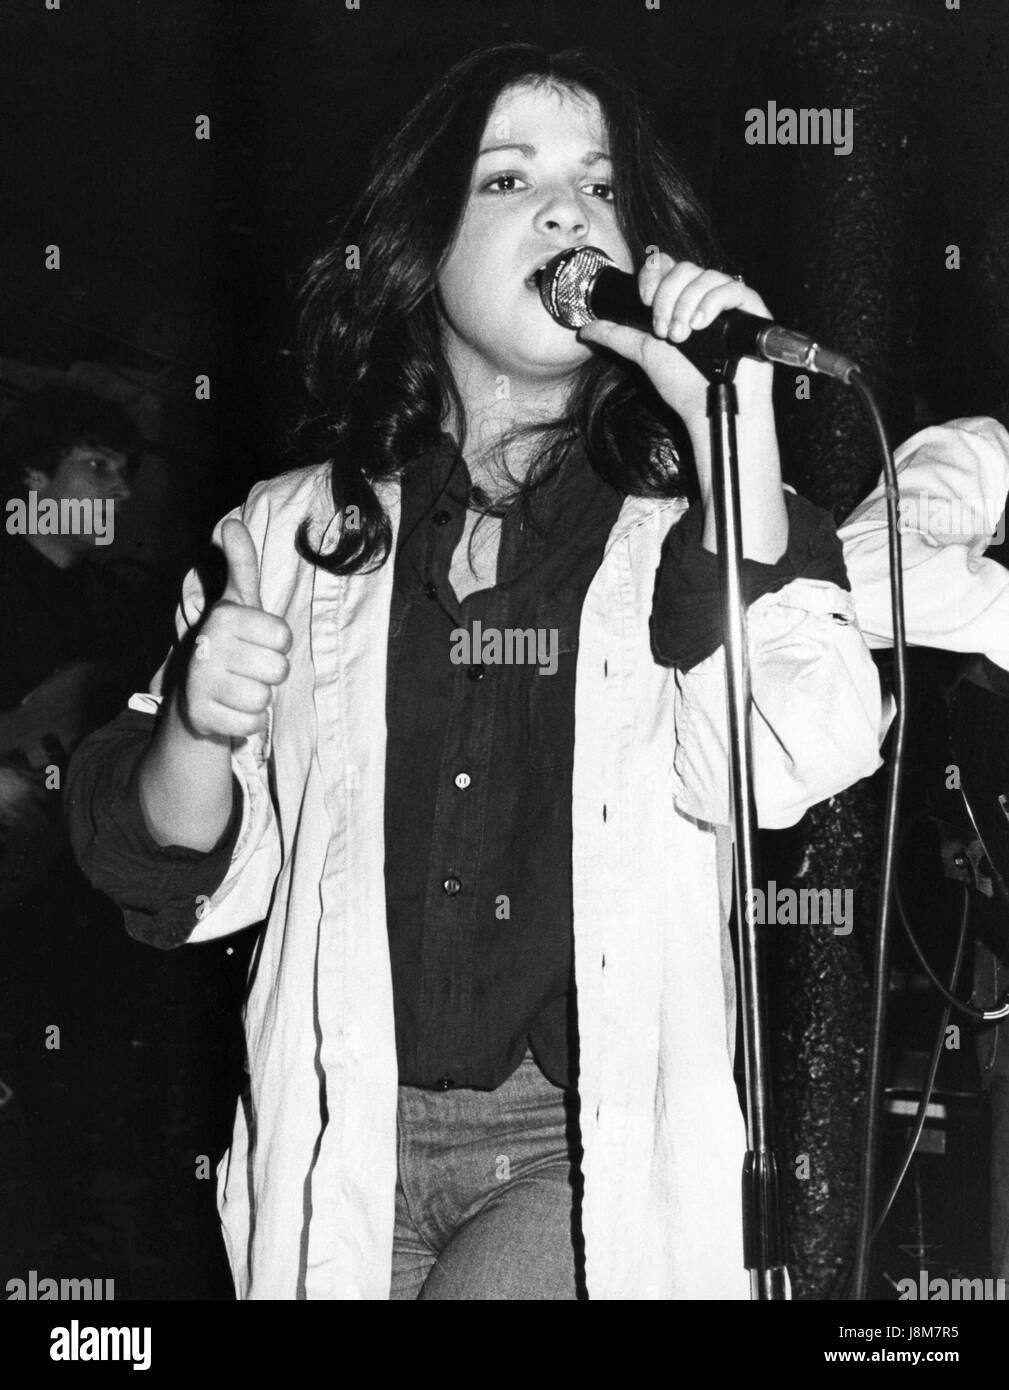 Rachel Sweet, U.S. pop singer, performs live on stage in London, England on November 21, 1979. She was signed to Independent music label Stiff Records. Stock Photo